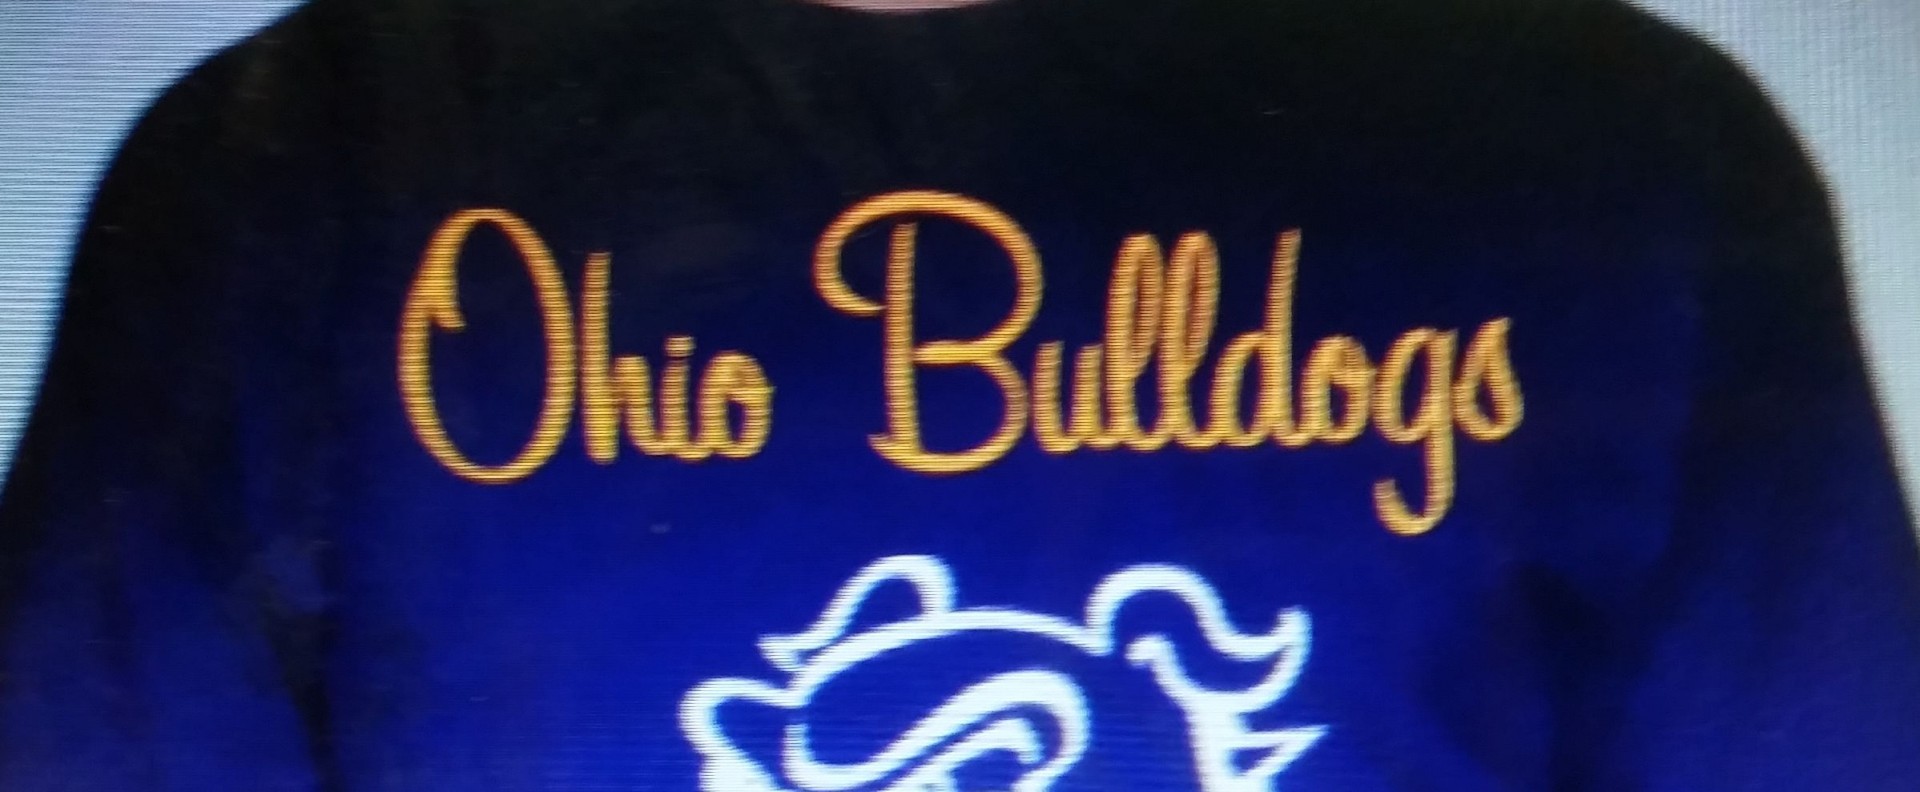 What is this font please?